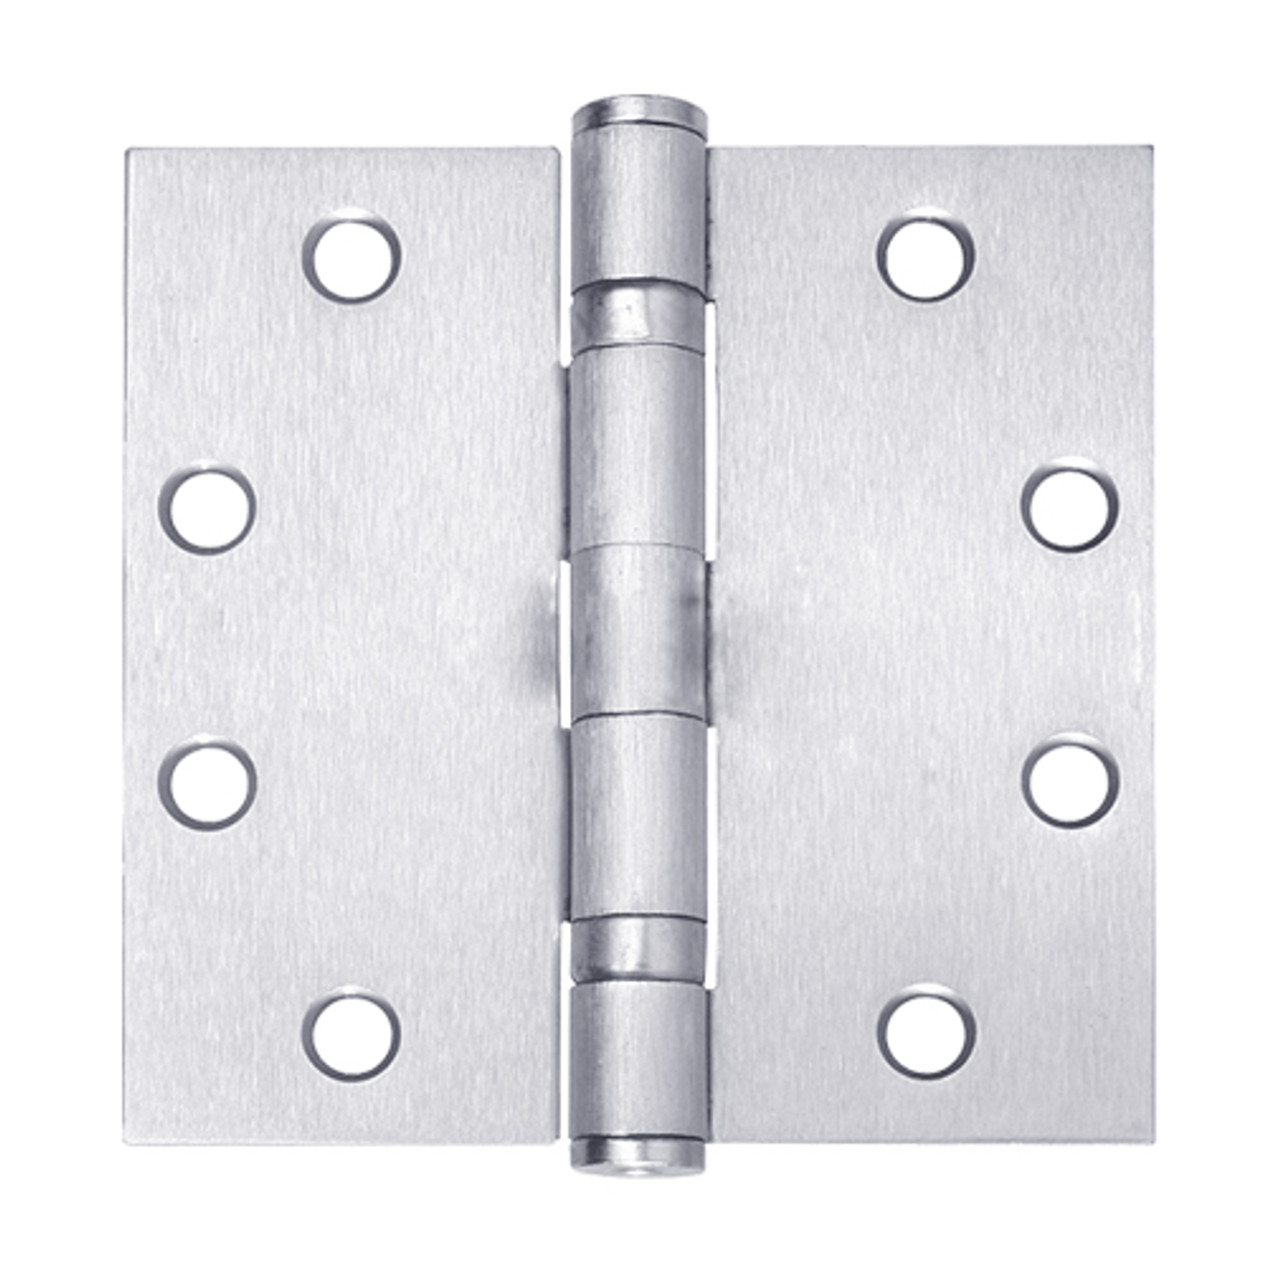 5BB1-4-5x4-651-TW8 IVES 5 Knuckle Ball Bearing Full Mortise Hinge with Electric Thru-Wire in Bright Chrome Plated